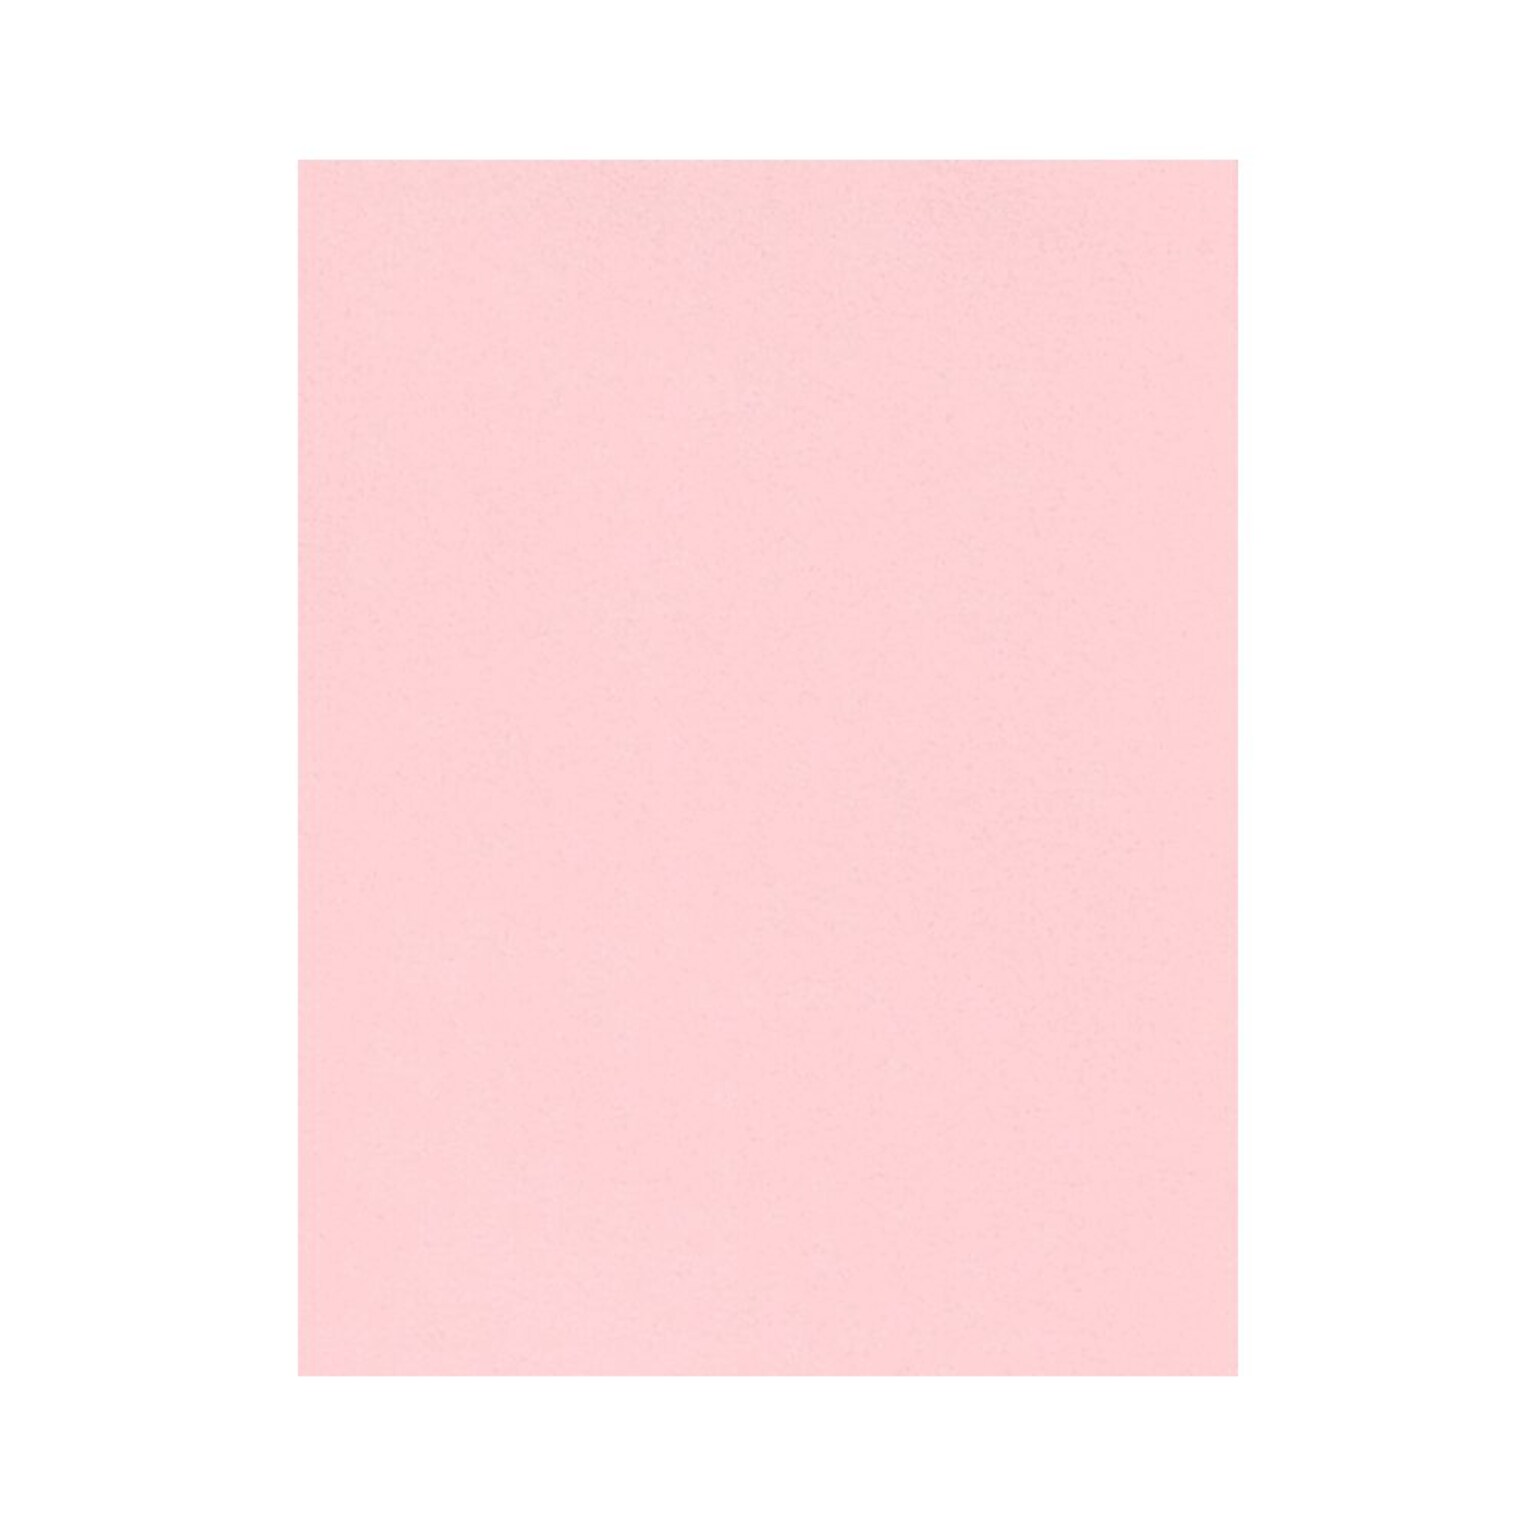 Lux Cardstock 8.5 x 11 inch, Candy Pink 250/Pack